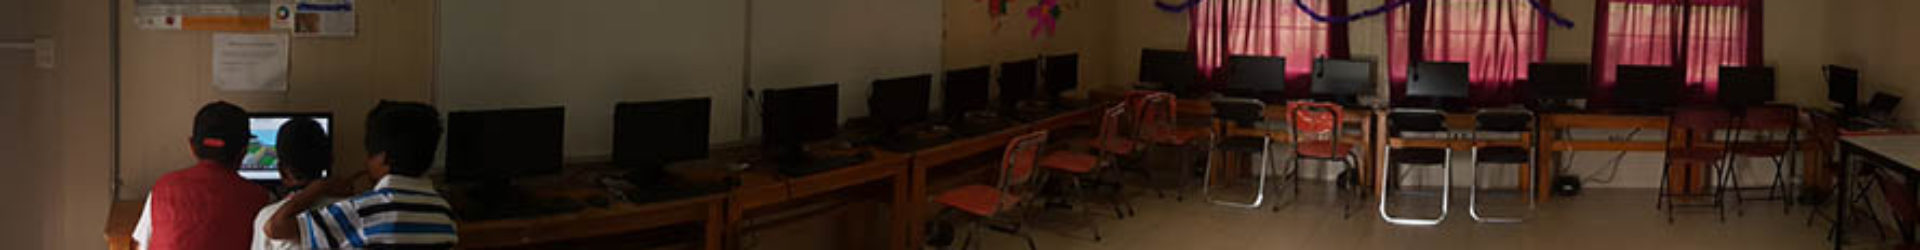 Kids on Computers Lab Set up in Ouled Moussa